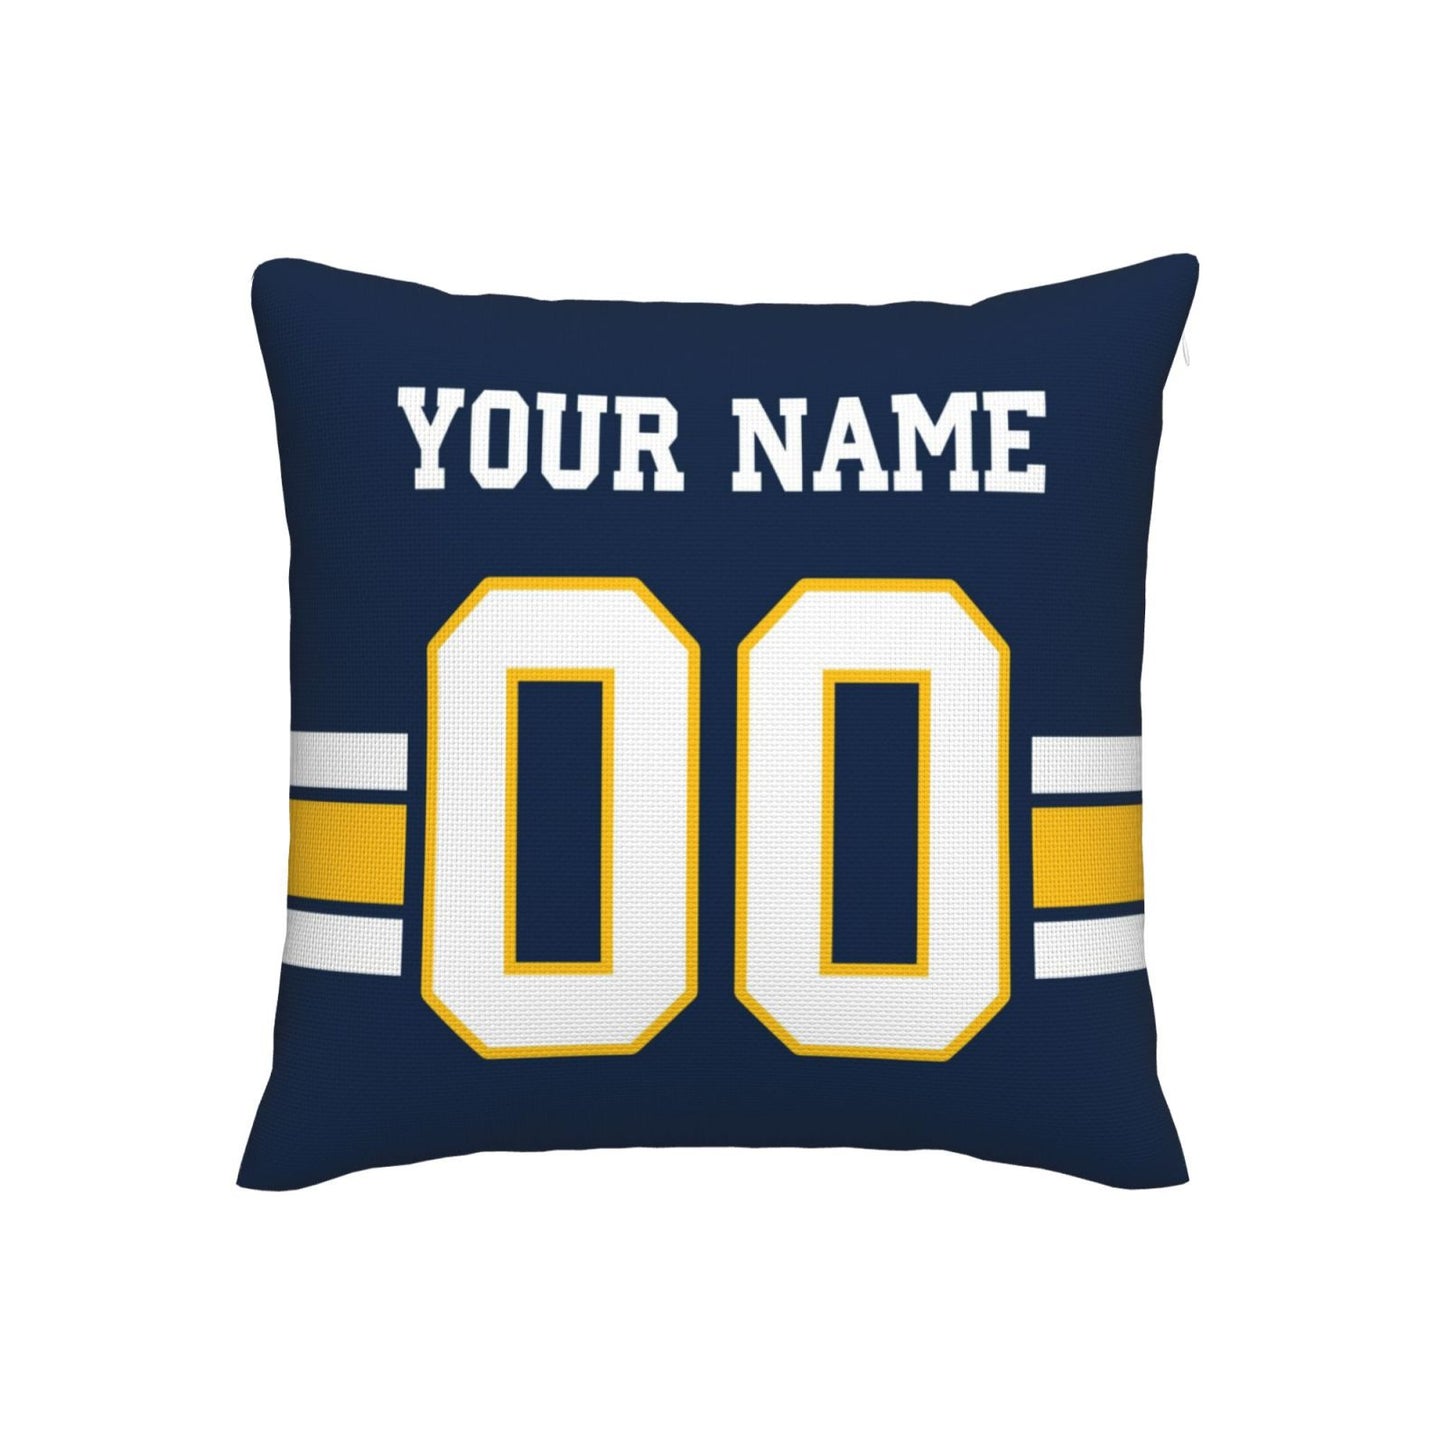 Customized Los Angeles Chargers Football Team Decorative Throw Pillow Case Print Personalized Football Style Fans Letters & Number Navy Pillowcase Birthday Gift